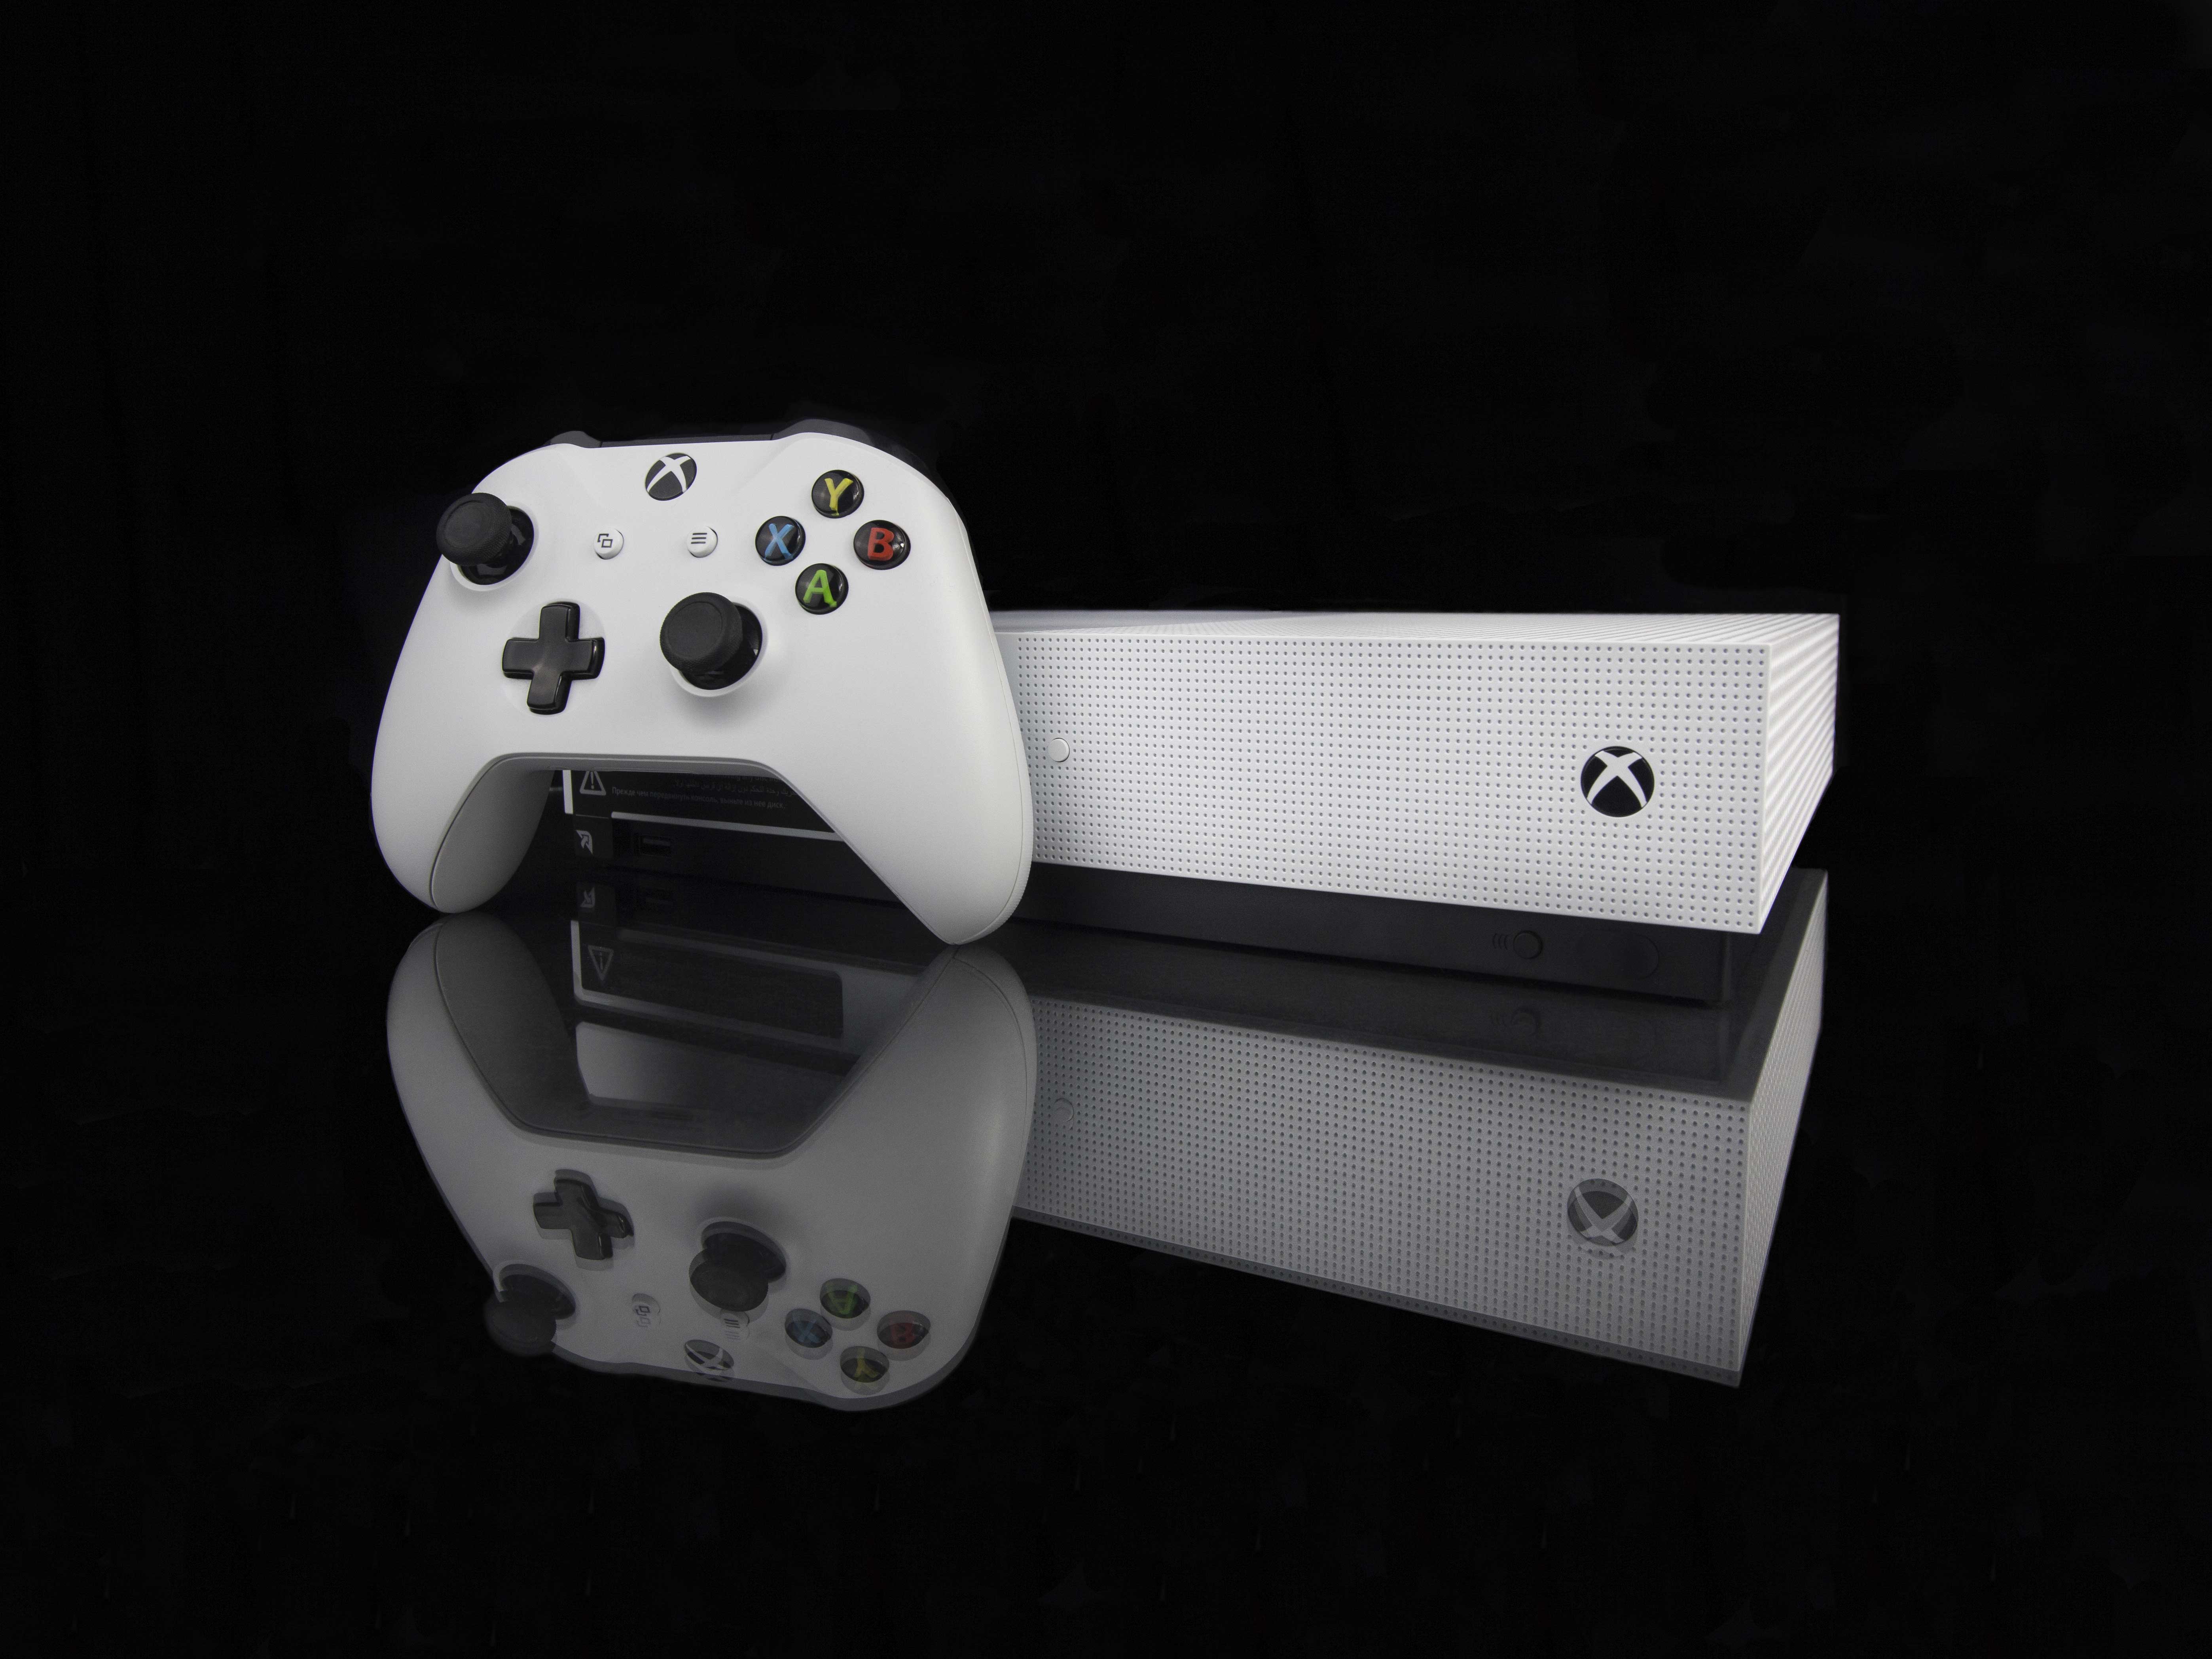 xbox-banner-4, What Would You Gift, whatwouldyougift.com